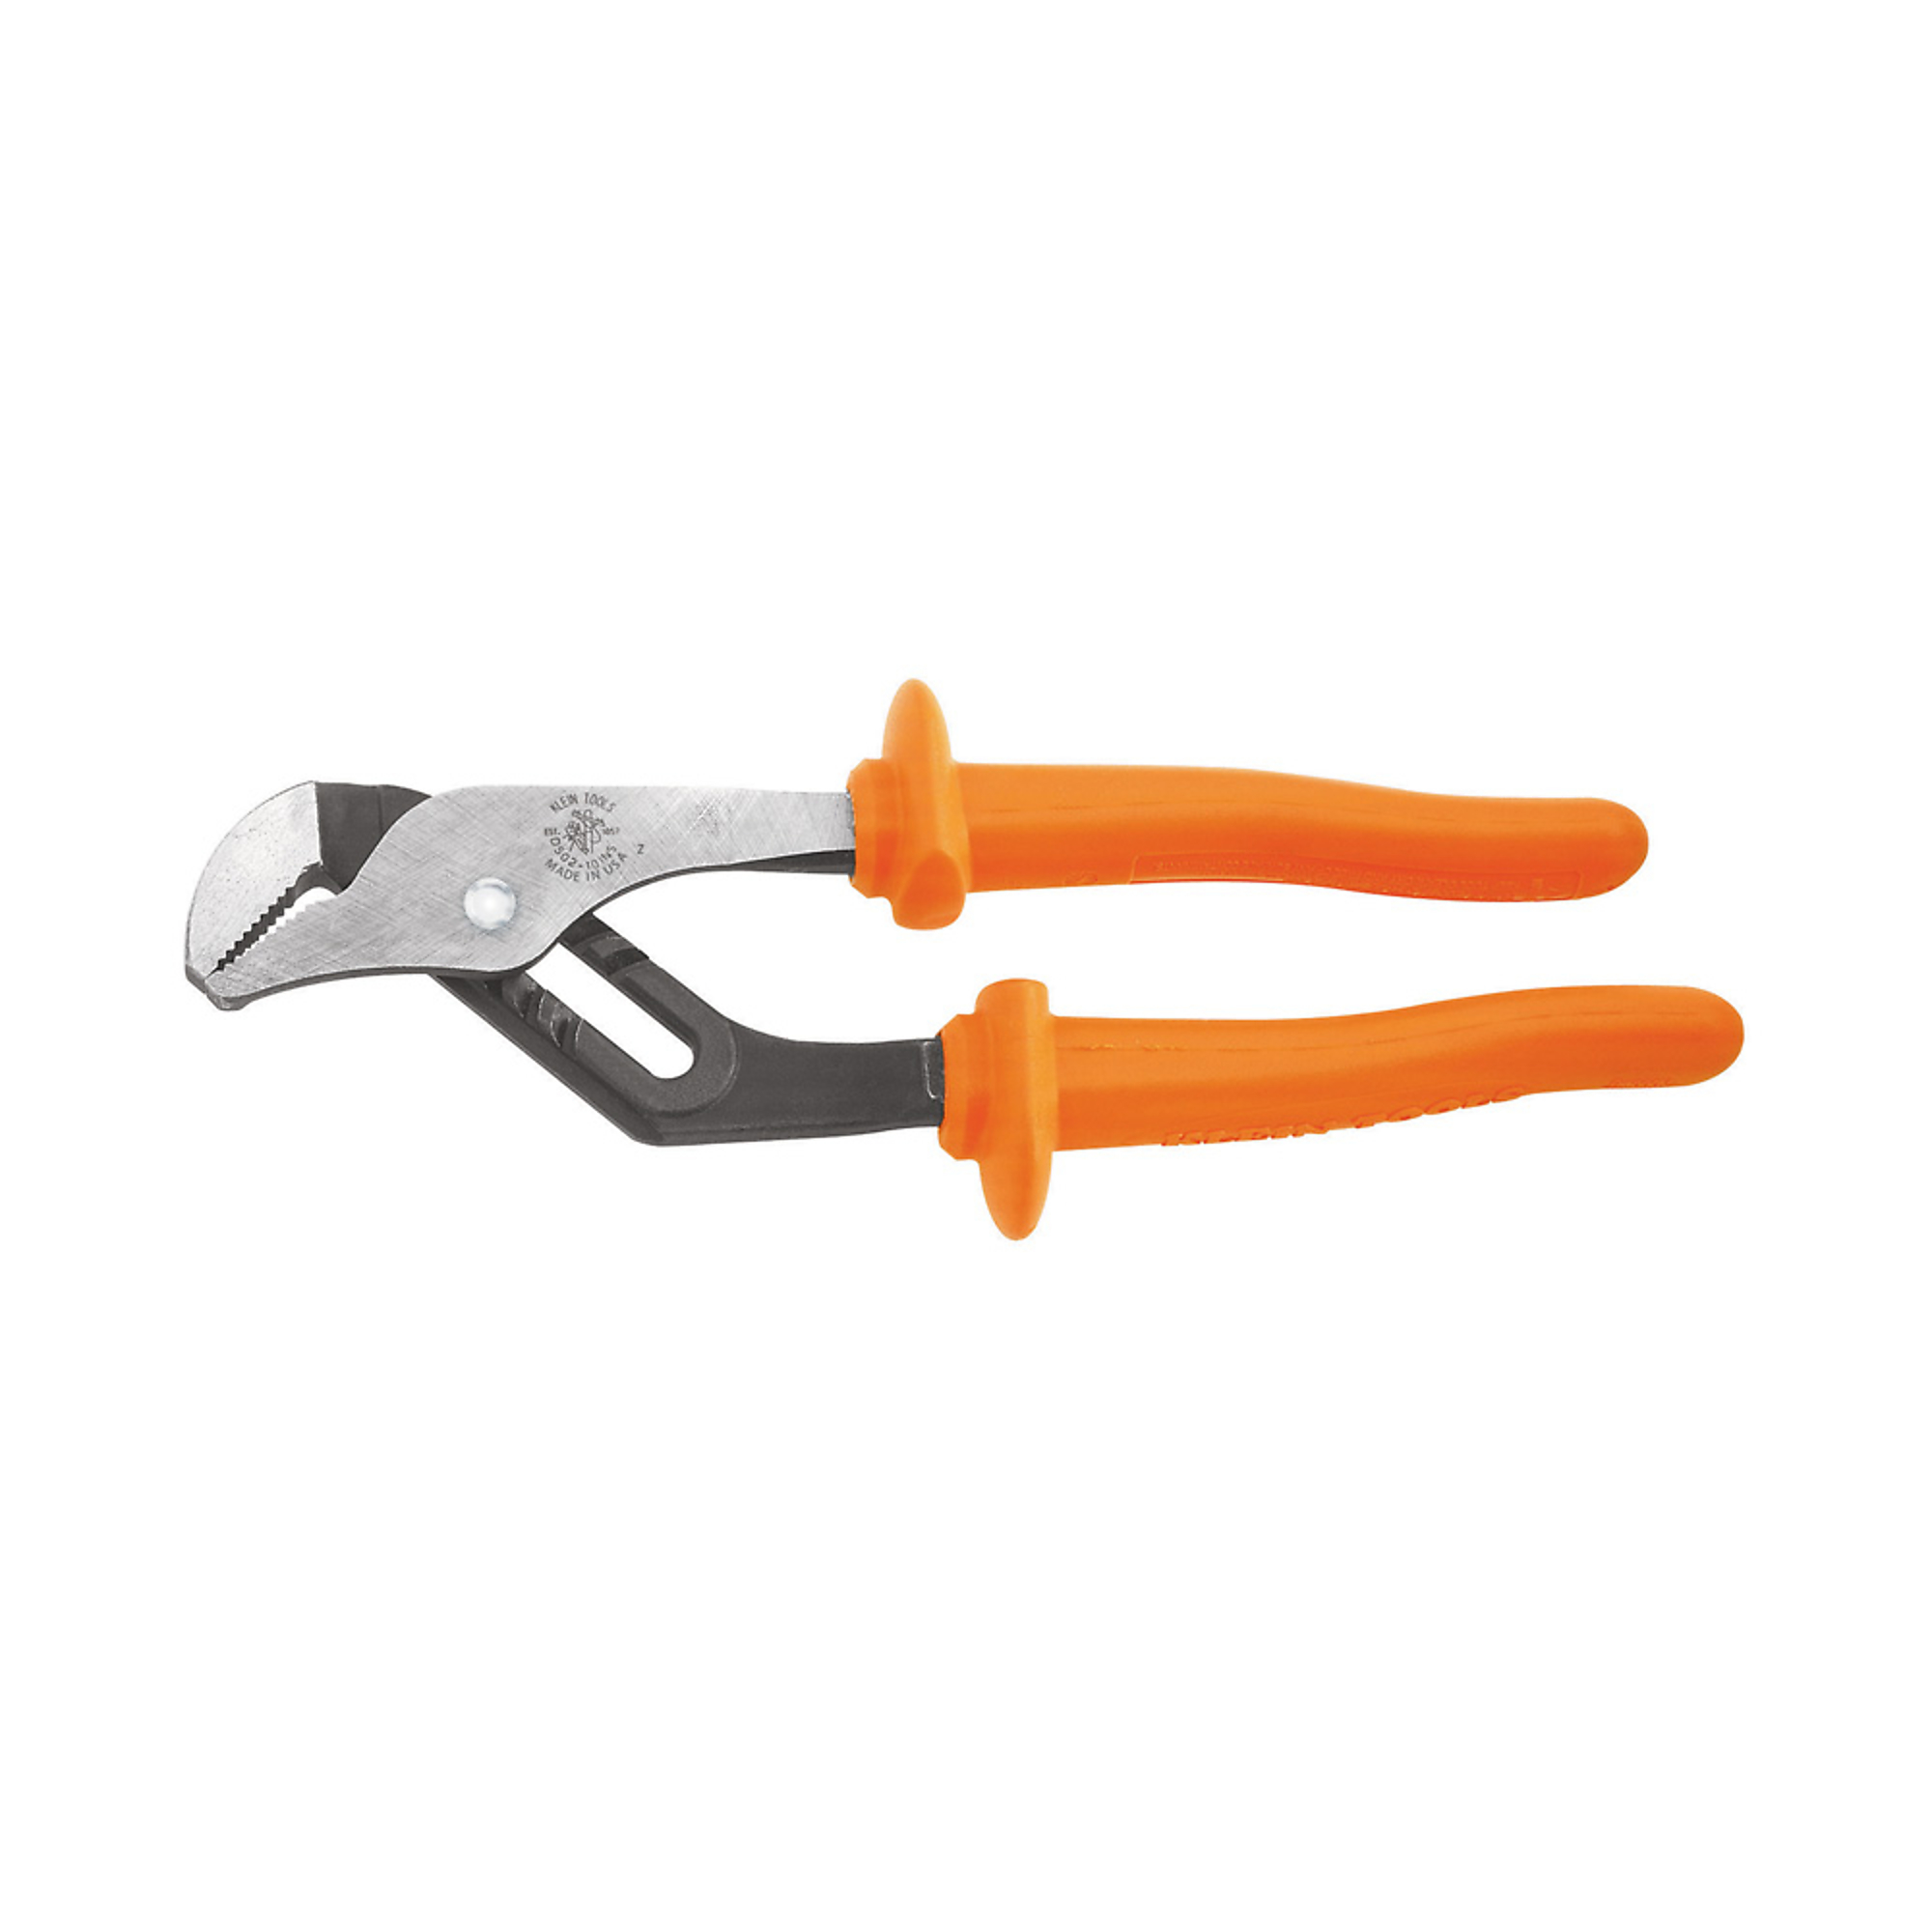 Klein Tools, 10Inch Pump Pliers, Insulated, Pieces (qty.) 1 Material Steel, Jaw Capacity 1.75 in, Model D502-10-INS